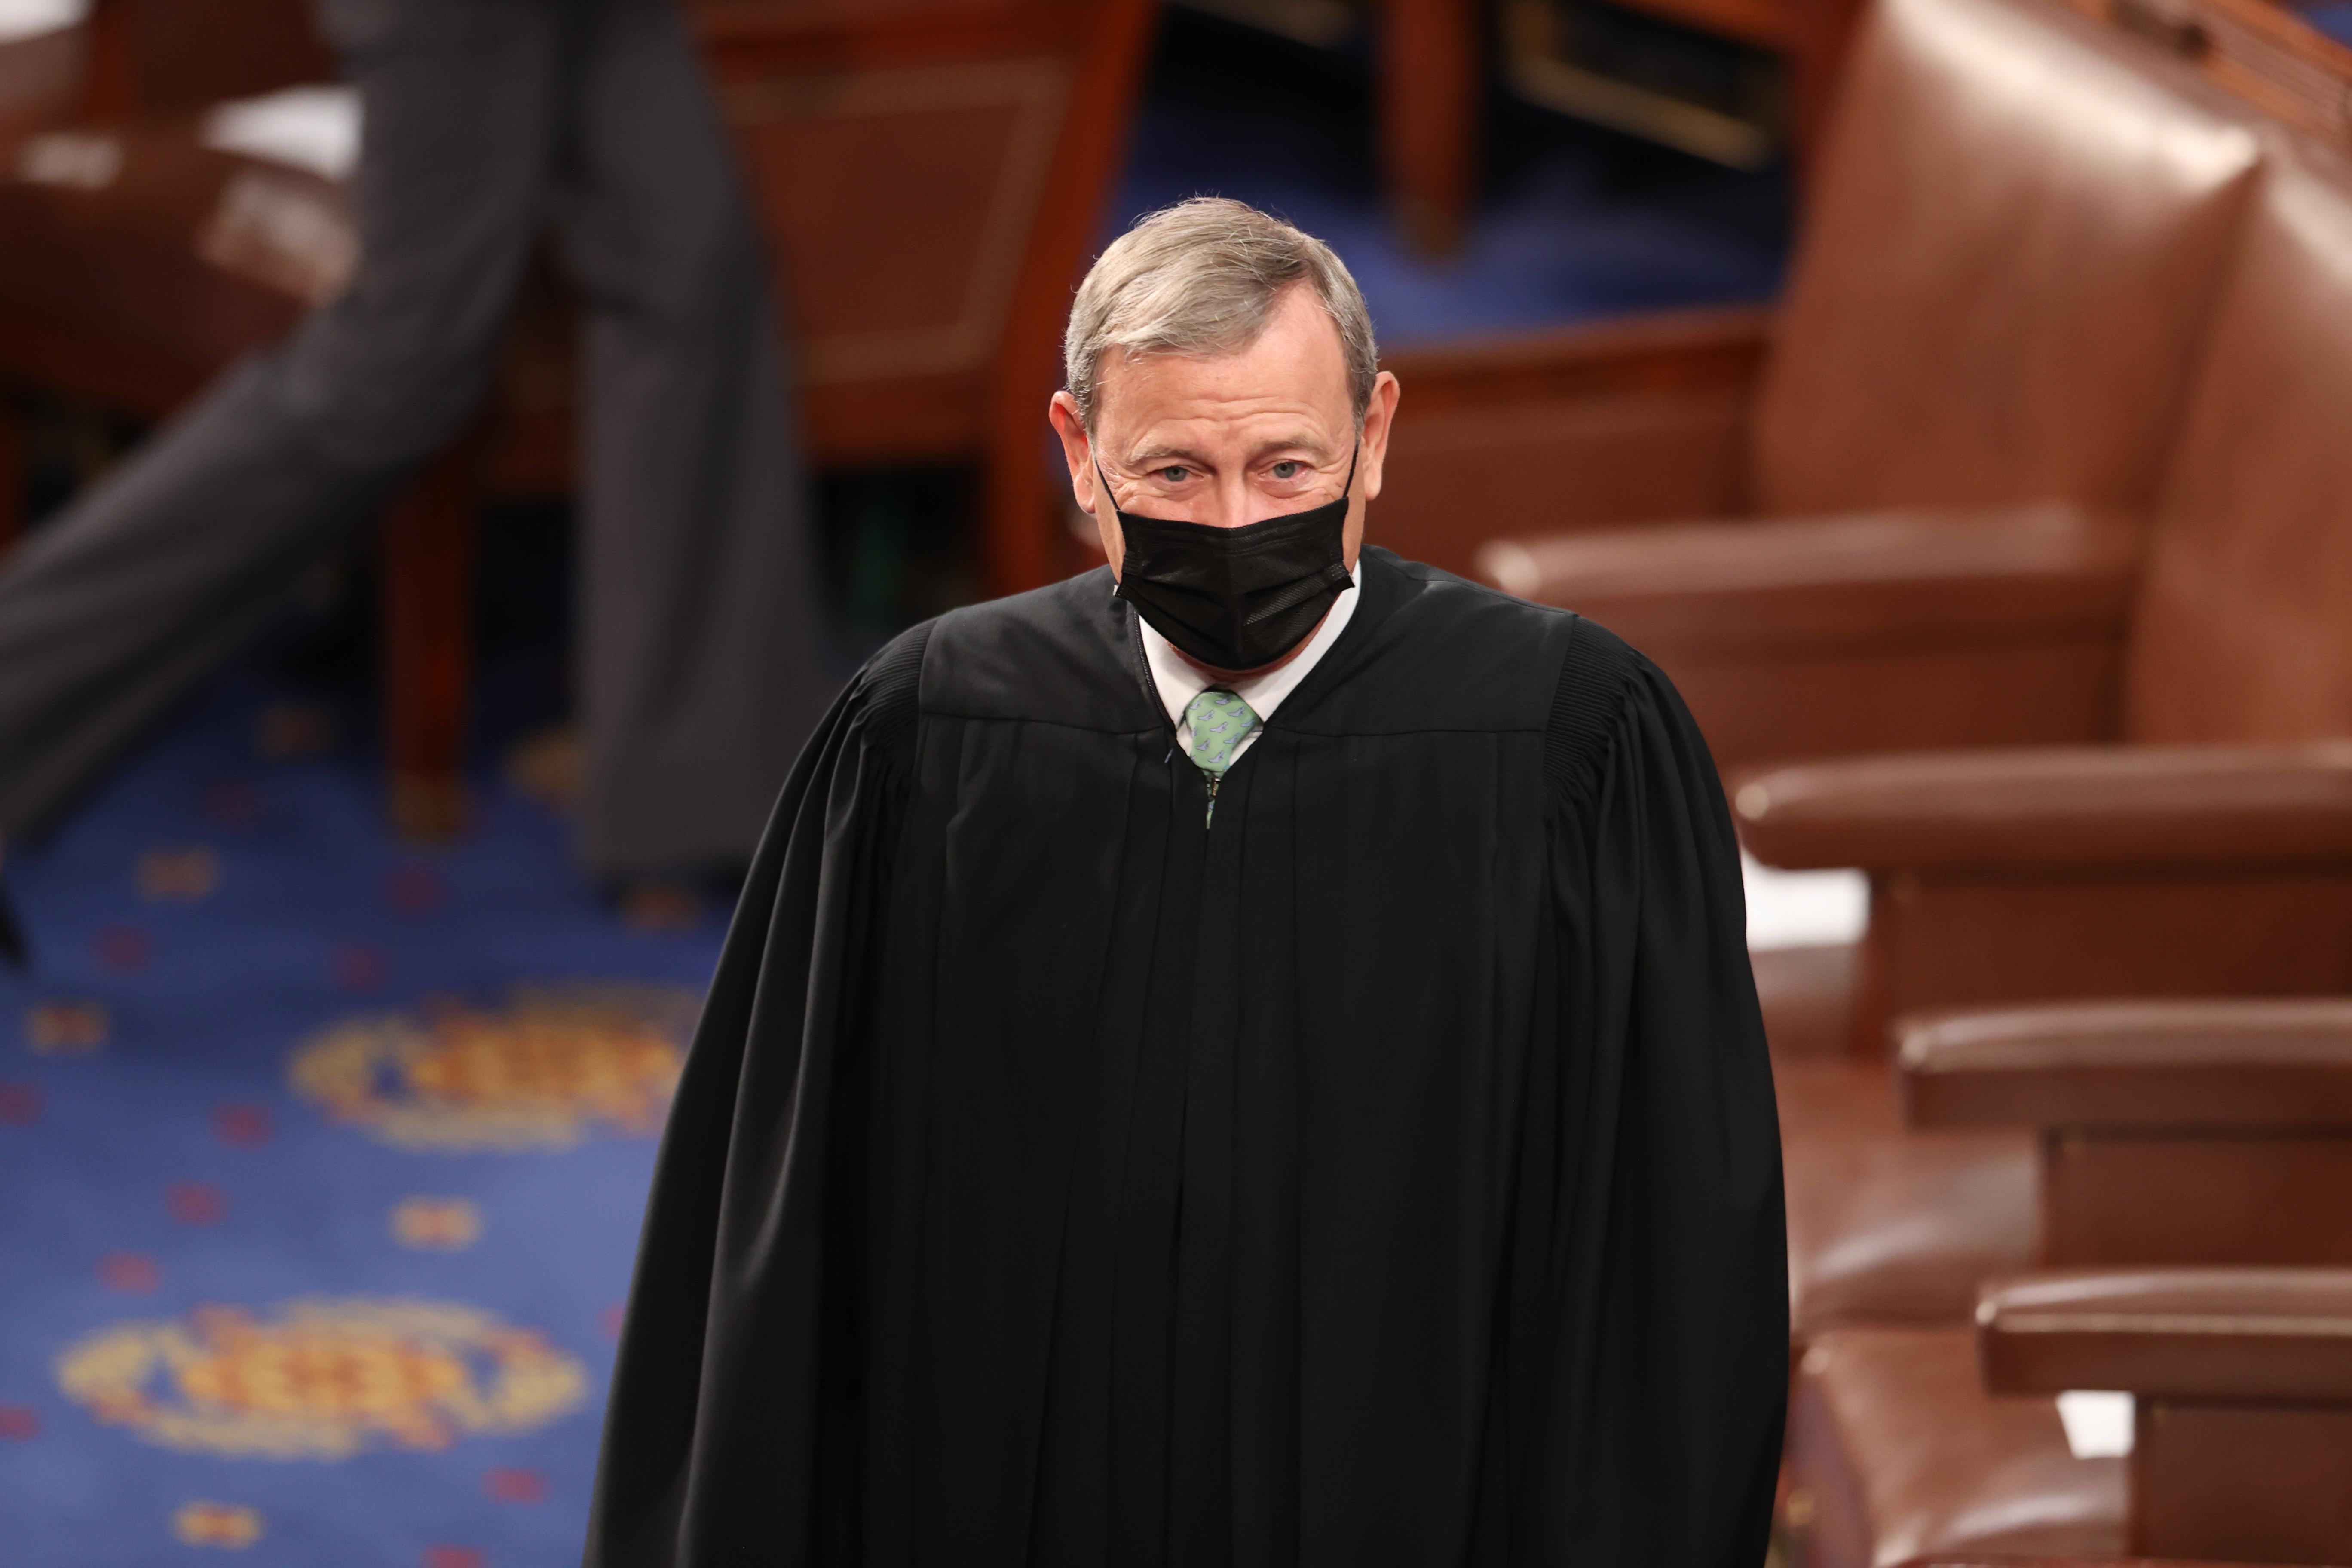 John Roberts in his robe and a simple black mask.